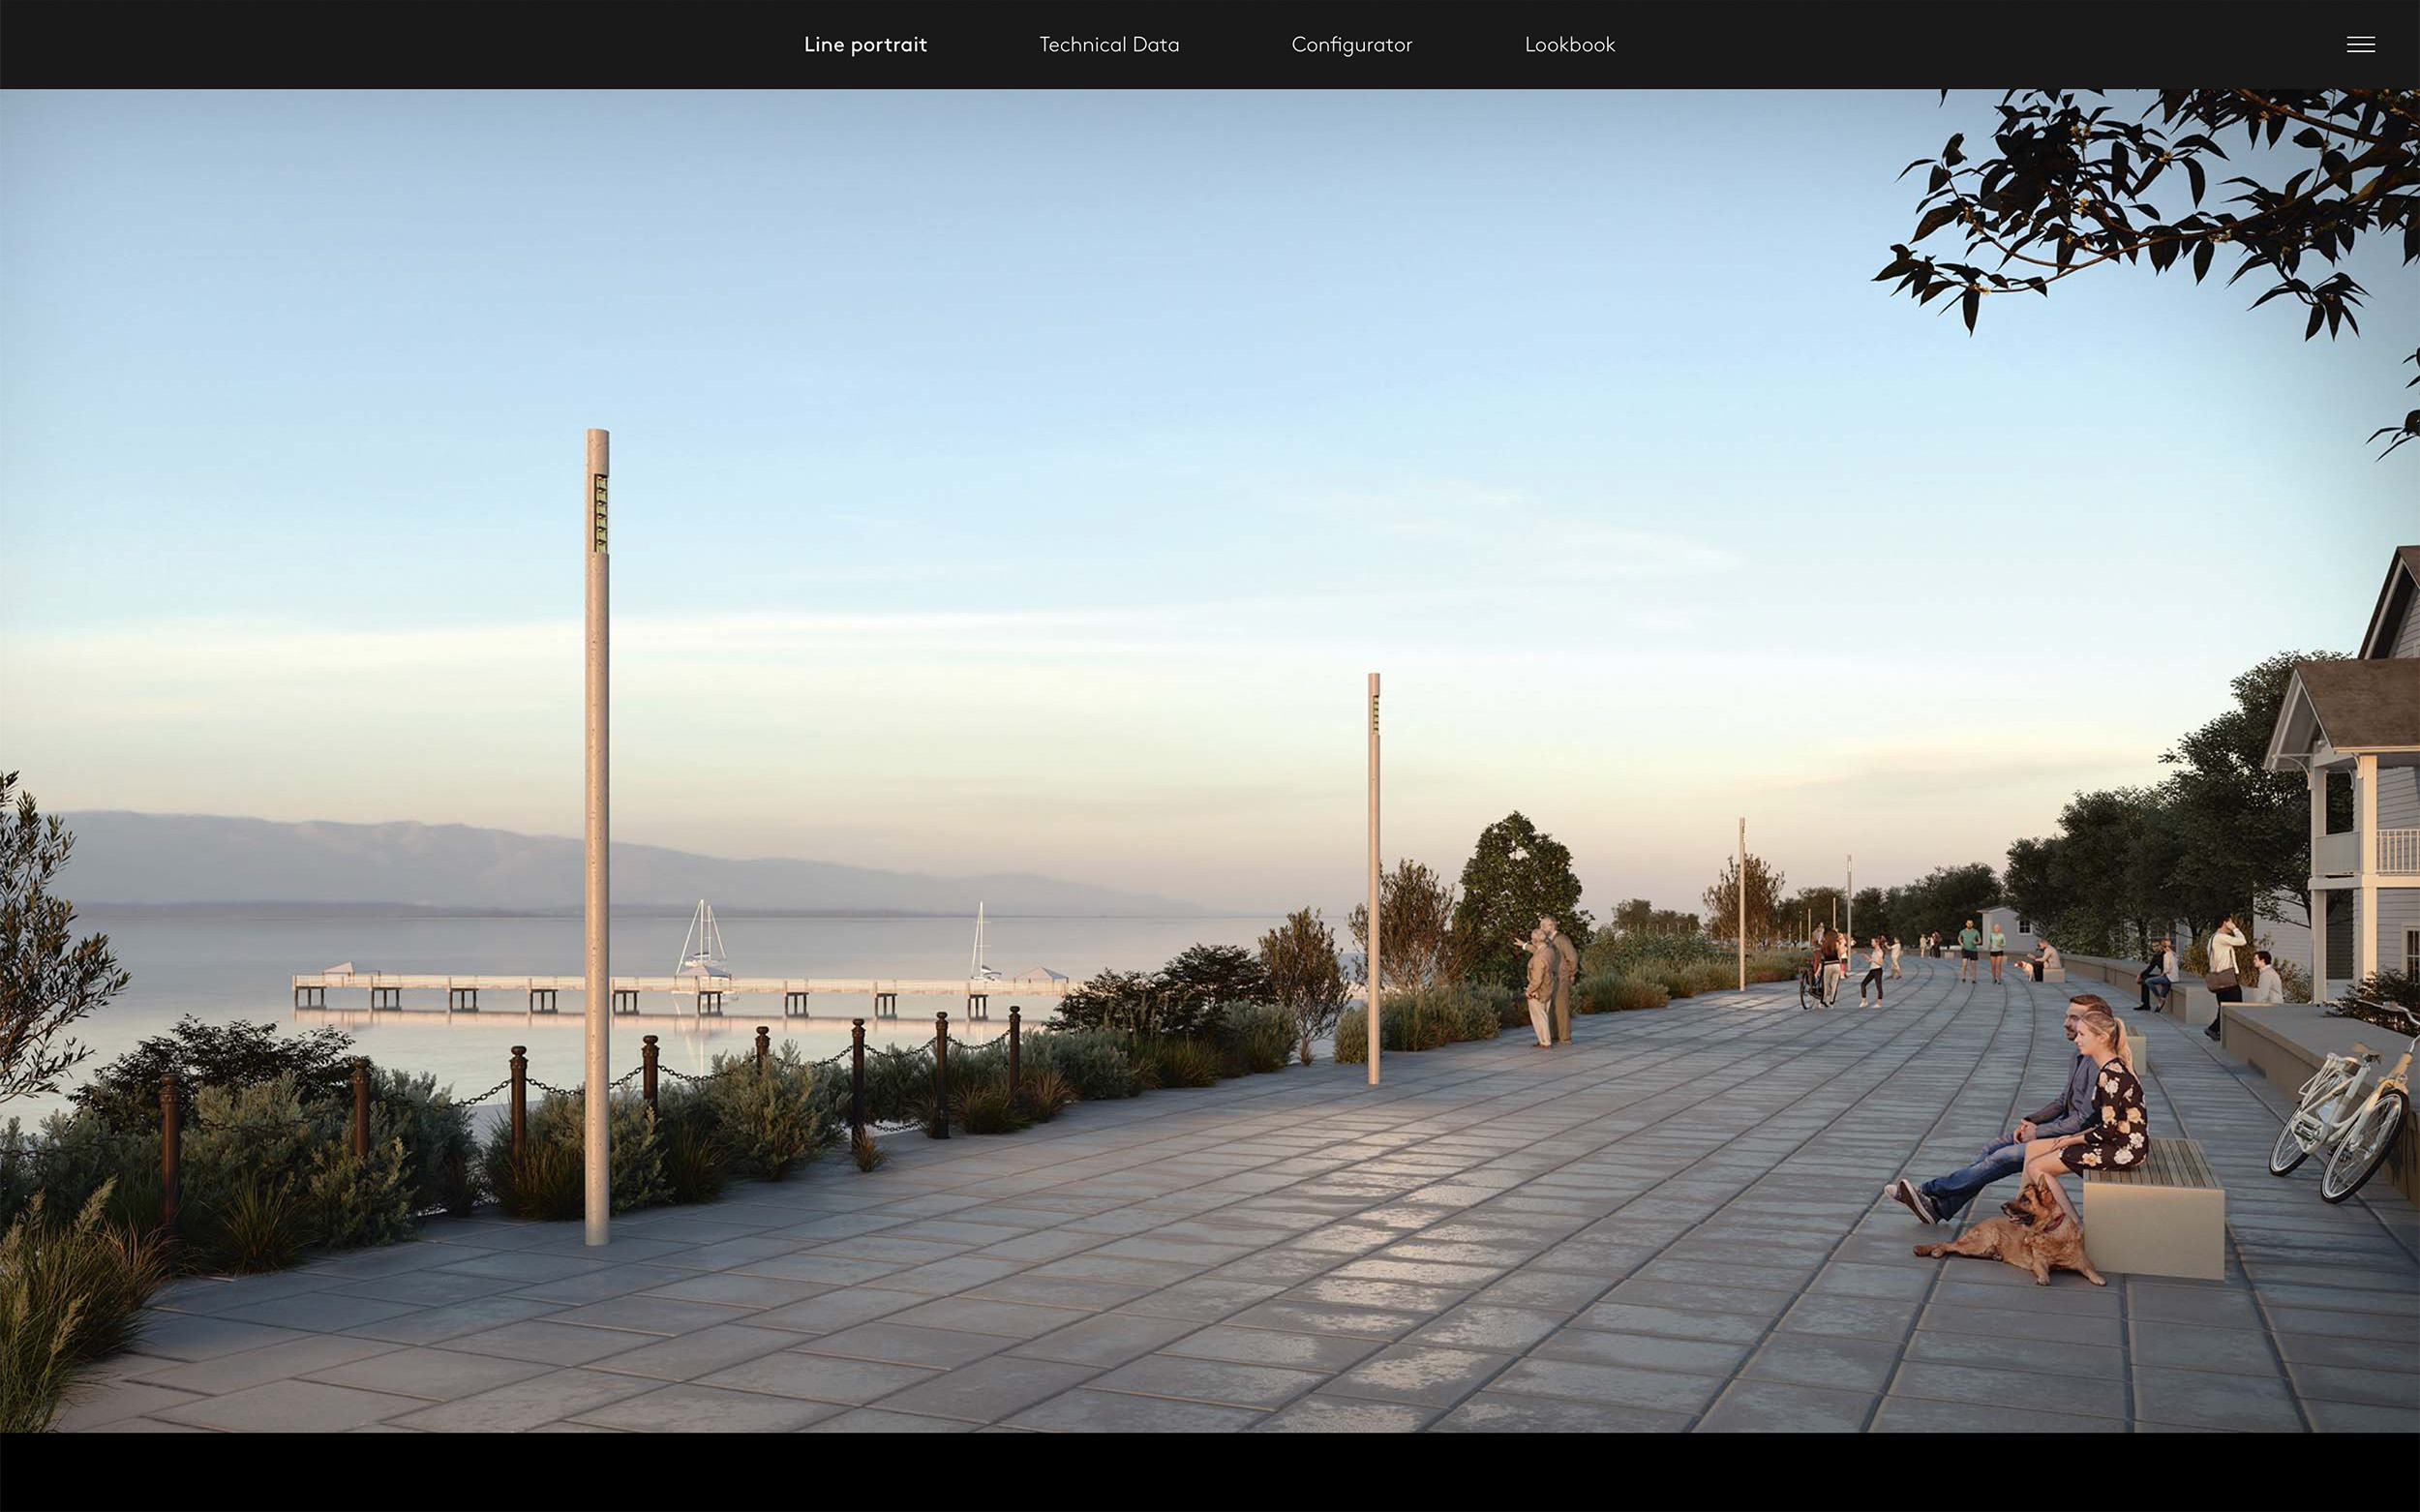 An image showcasing Line Portrait page with a full width image of a boardwalk that features the luminaires.